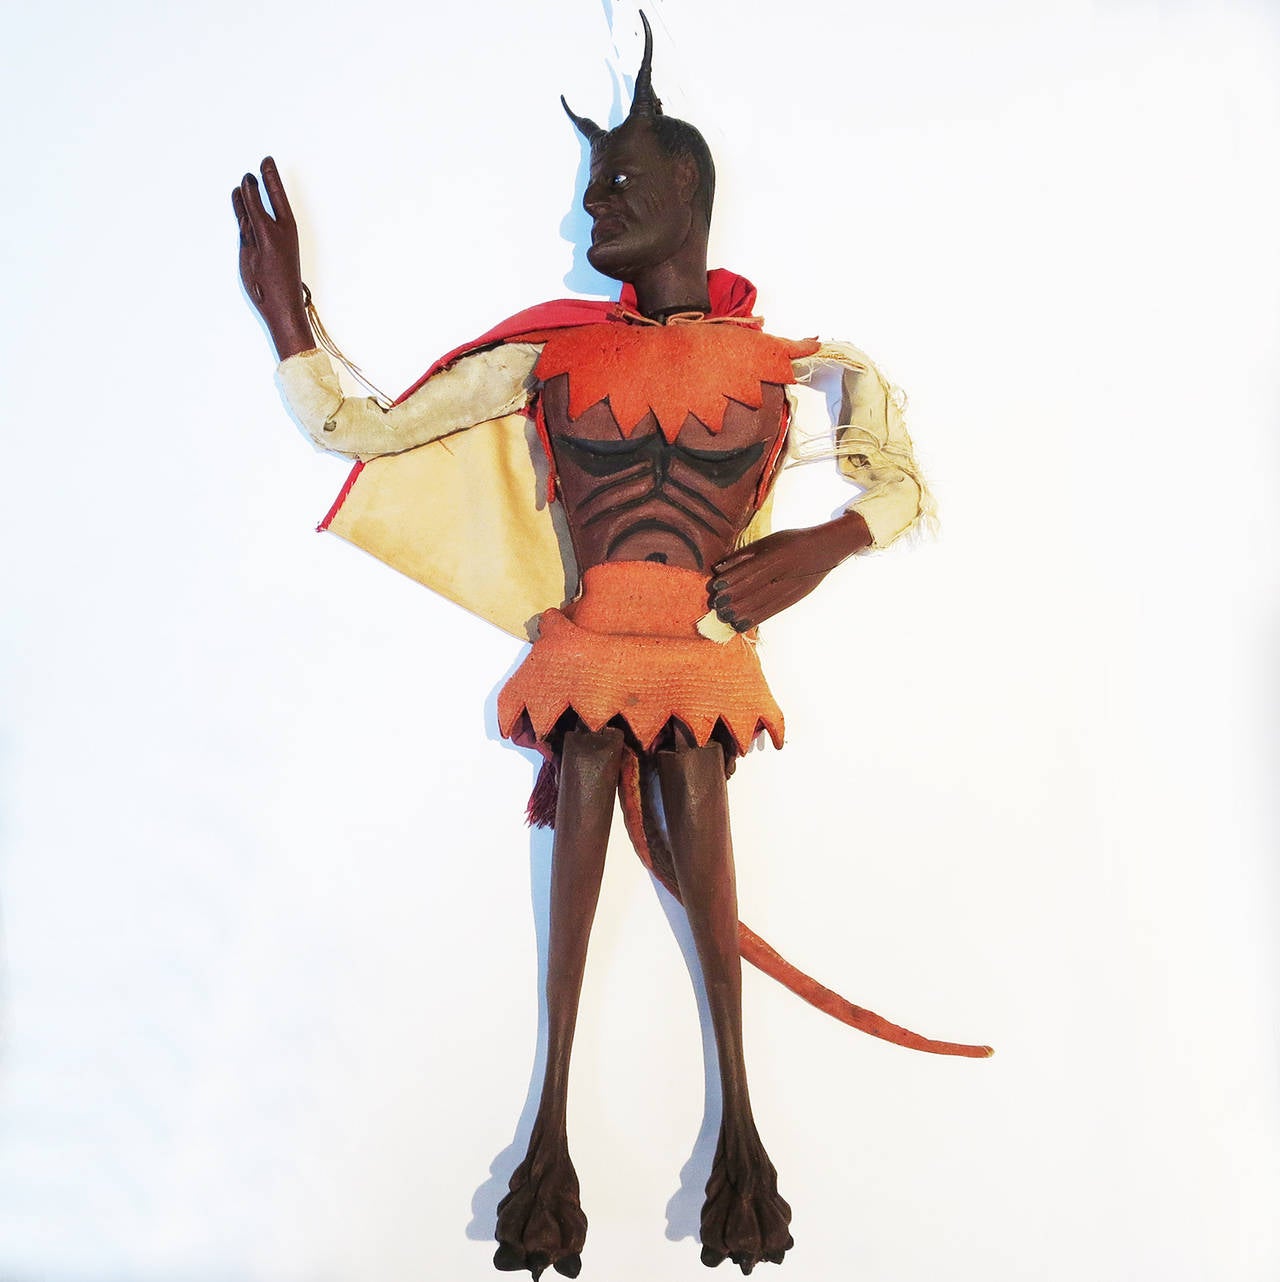 A very fine example of a professionally carved puppet from Italian theater. Puppet shows very very popular in the 19th and early 20th century, and the devil could always add a dramatic twist to any tale. Ours is quite early in depiction, with the